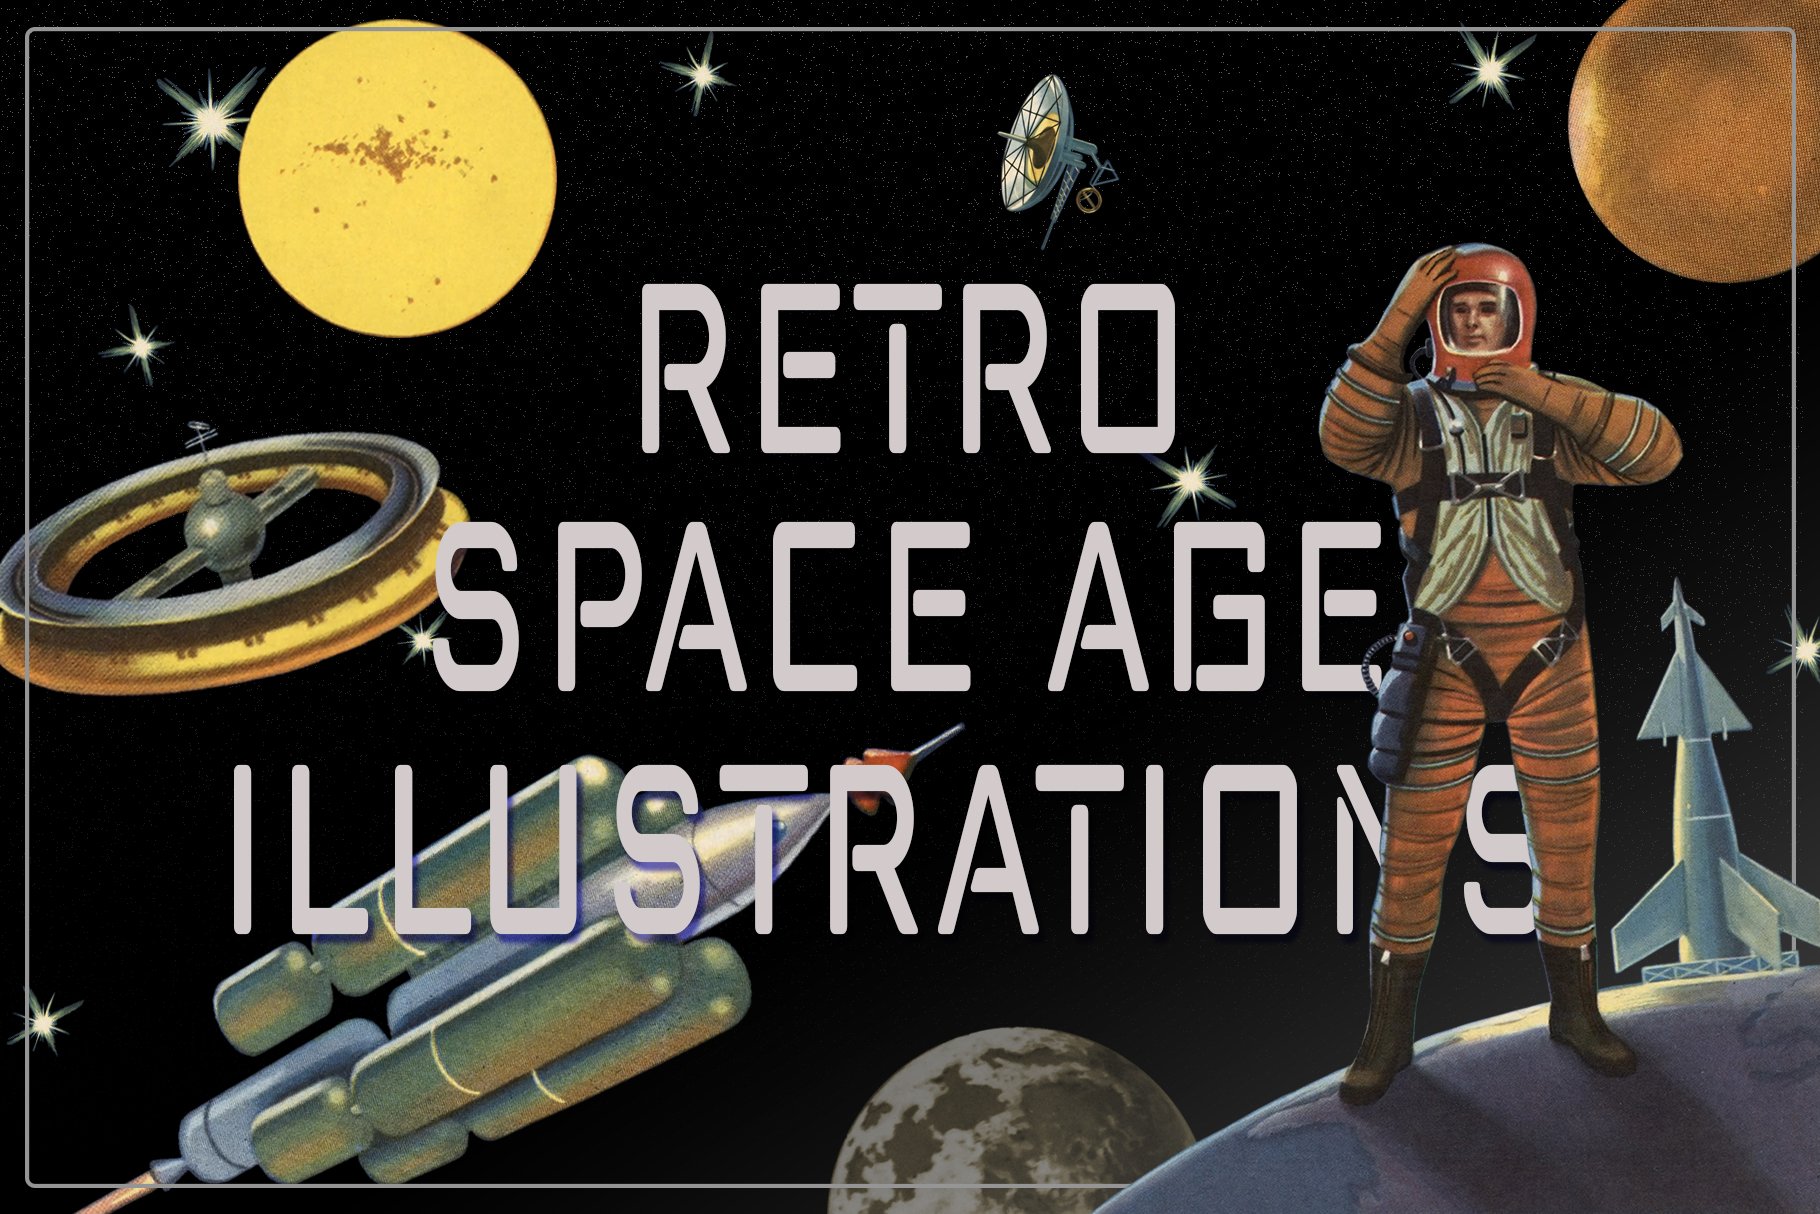 Retro Space Age Illustrations cover image.